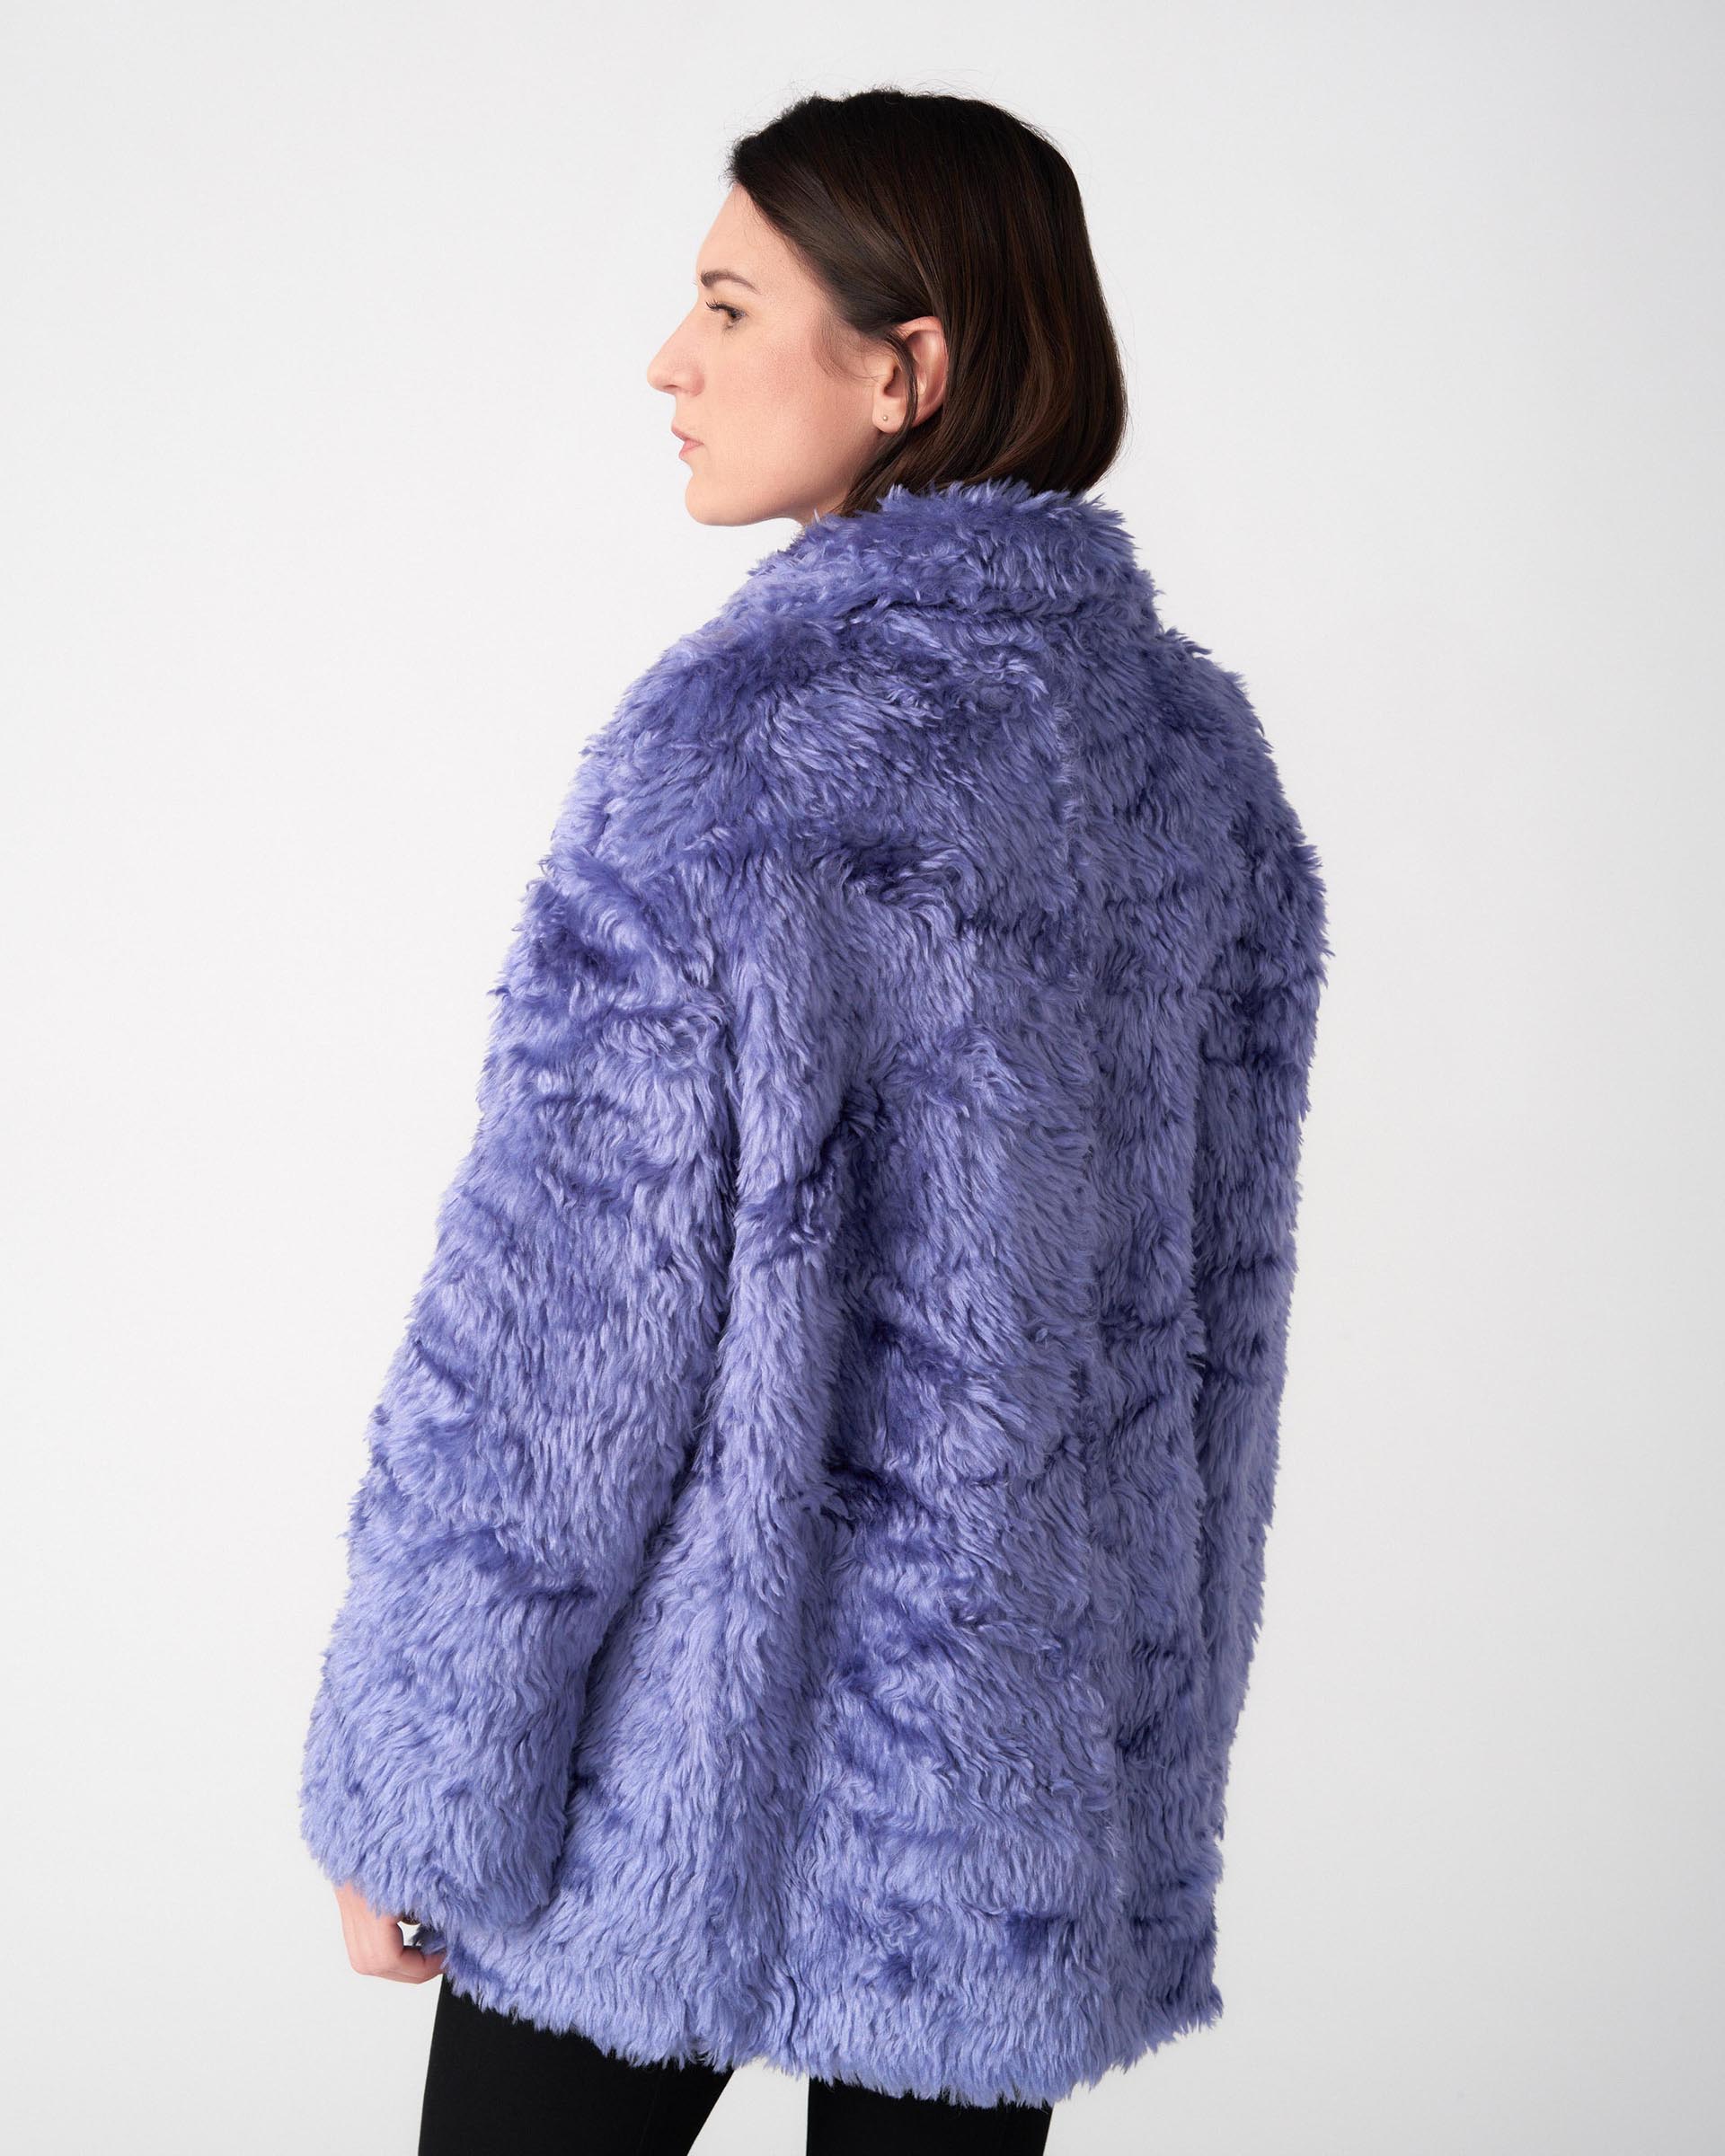 The Market Store | Over Fur Jacket